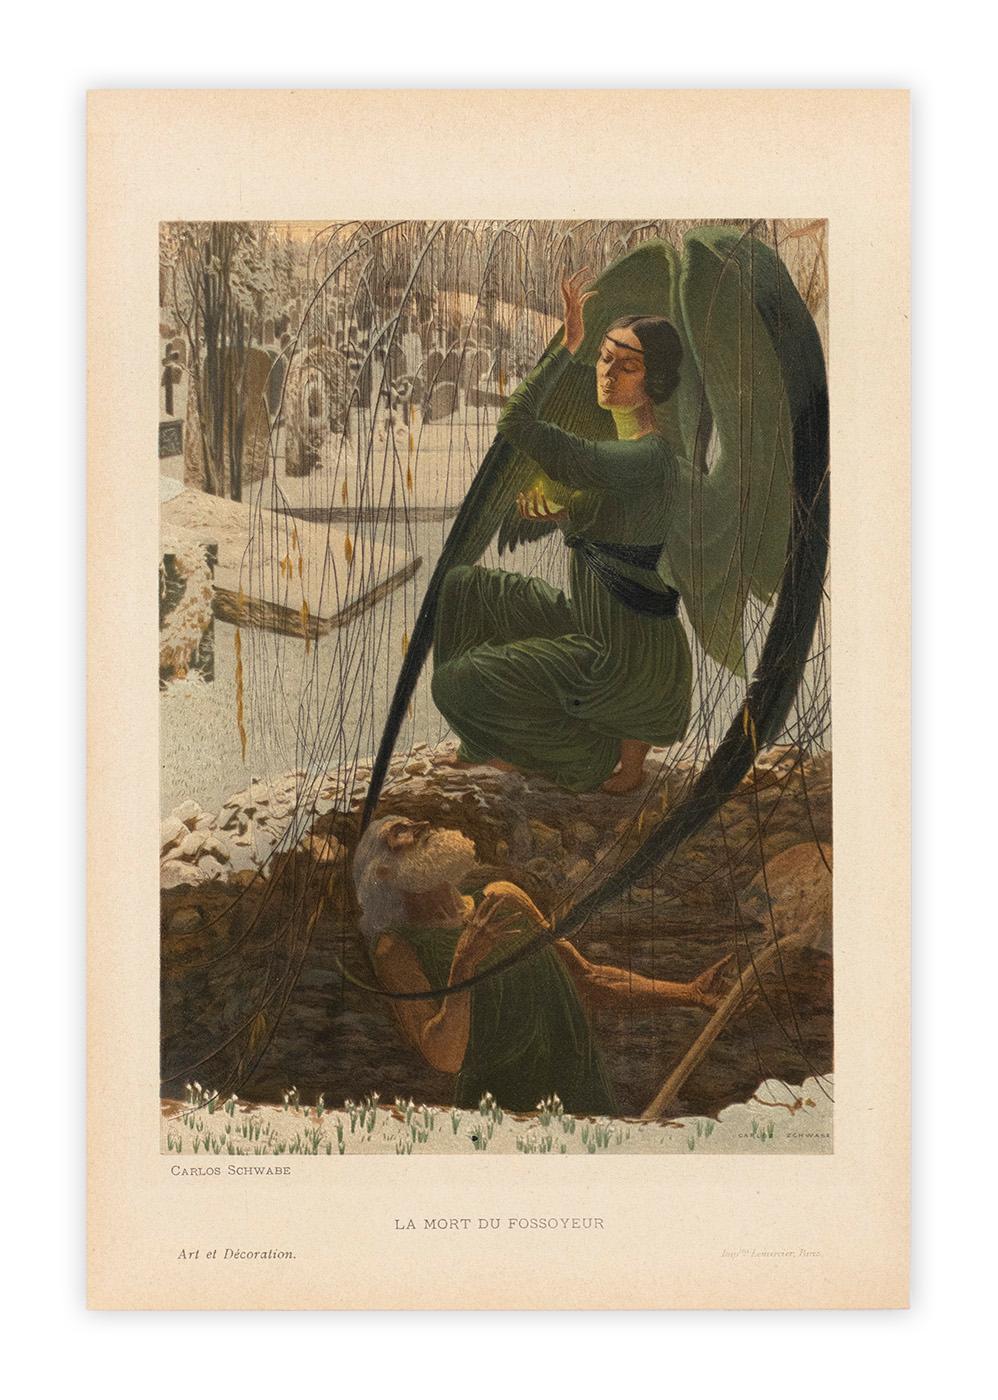 Death of the Gravedigger by Carlos Schwabe, Symbolist lithograph, c. 1900